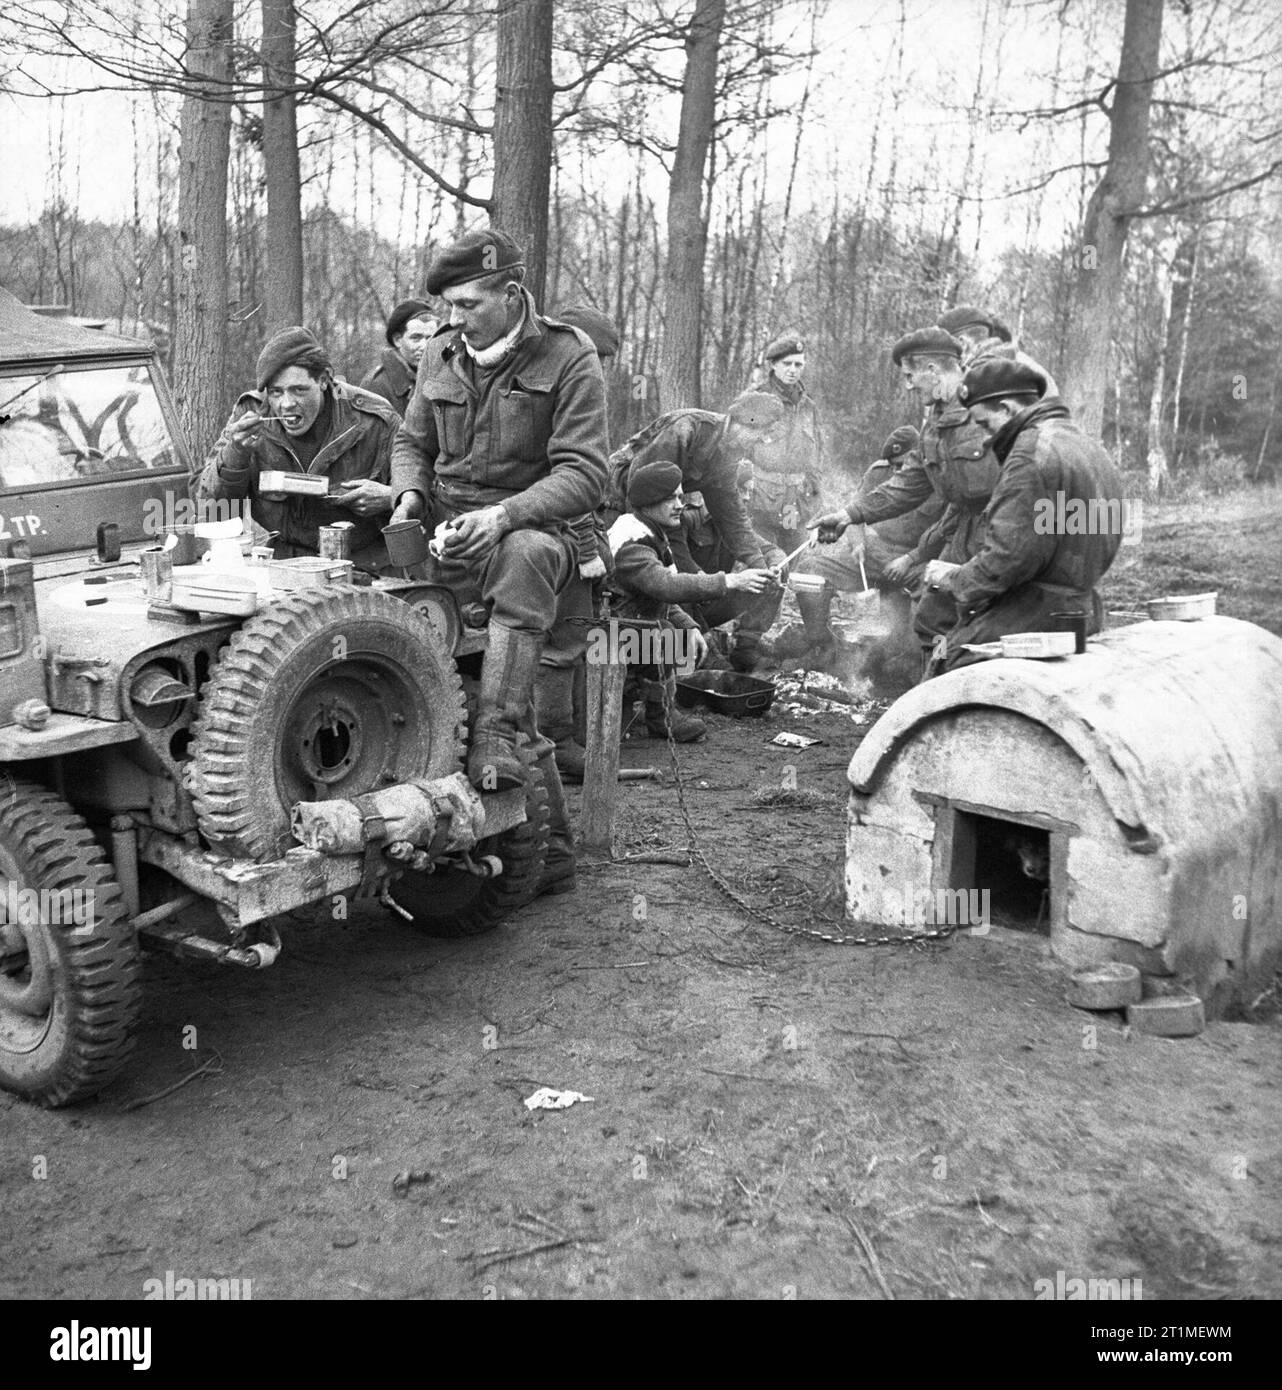 The Campaign in North West Europe 1944-45 Royal Engineers of 6th Airborne Division pause for a hot meal by their jeep near a German farmhouse during the advance through Westphalia. The farm dog (in the nearby kennel) refuses to fraternize. Stock Photo